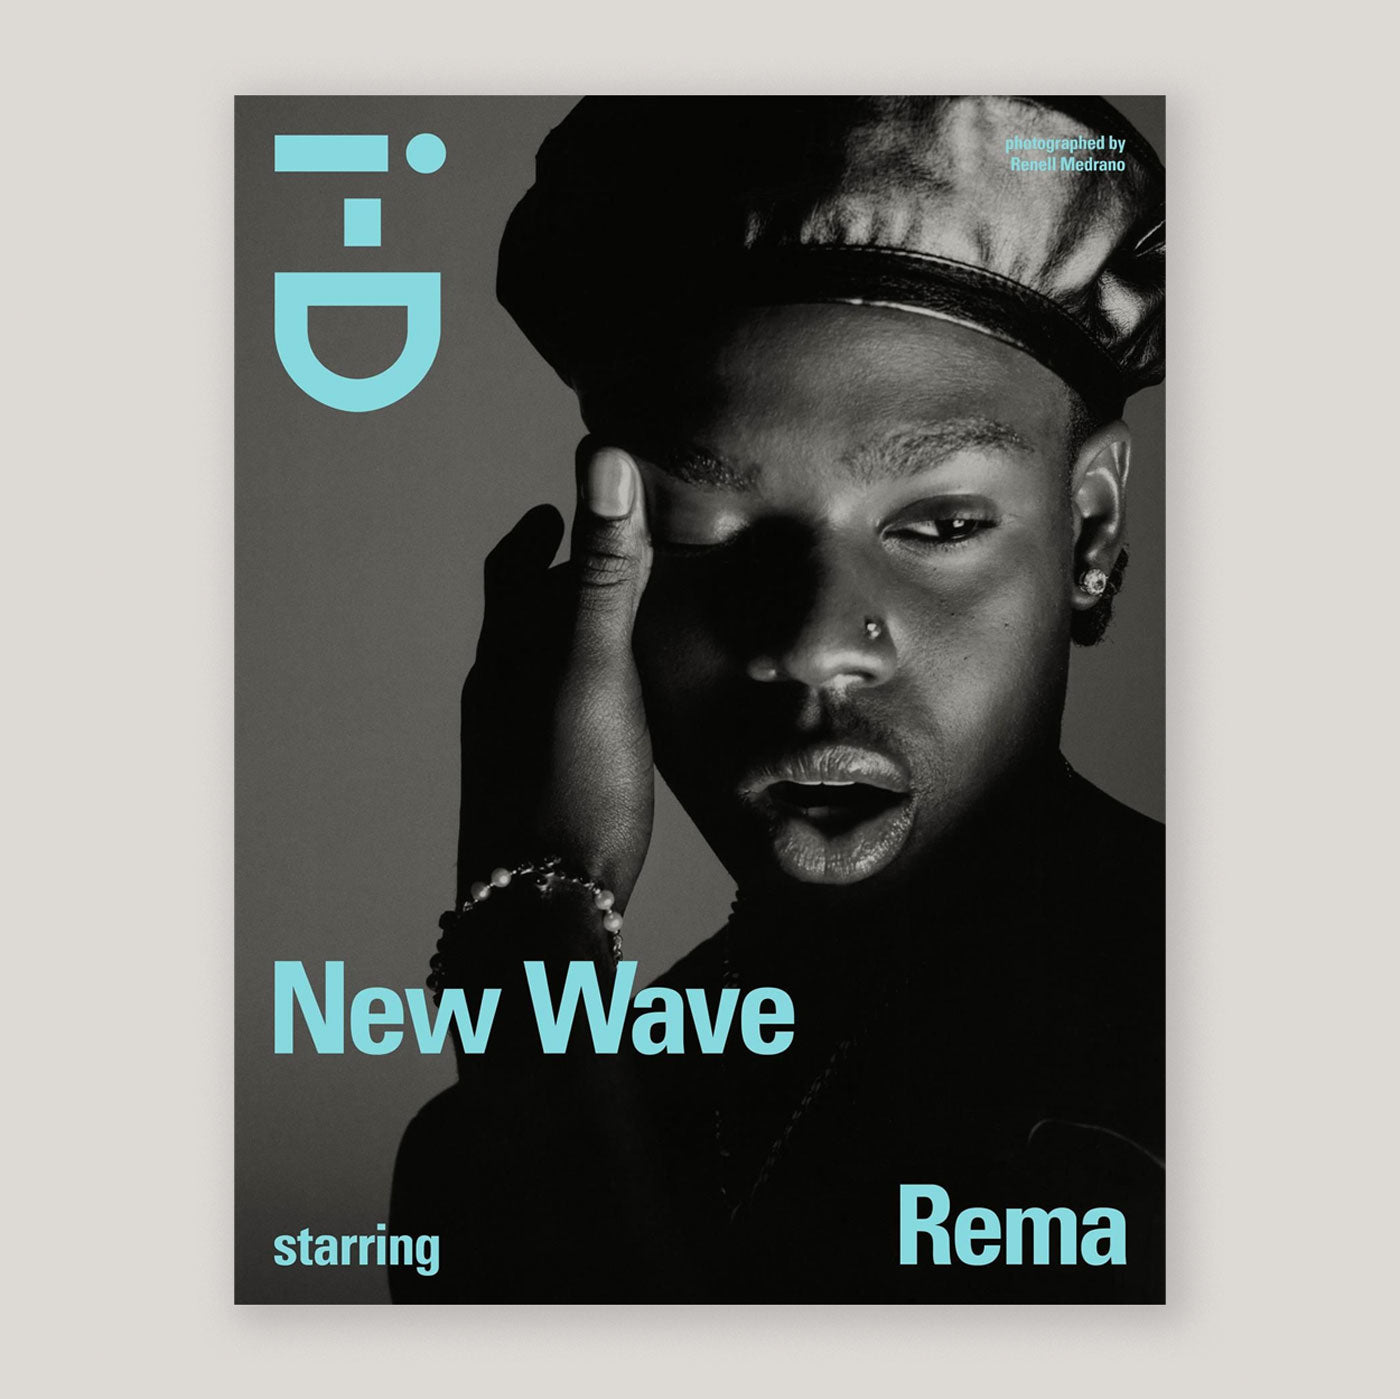 i-D Magazine Autumn 2023 | The New Wave Issue